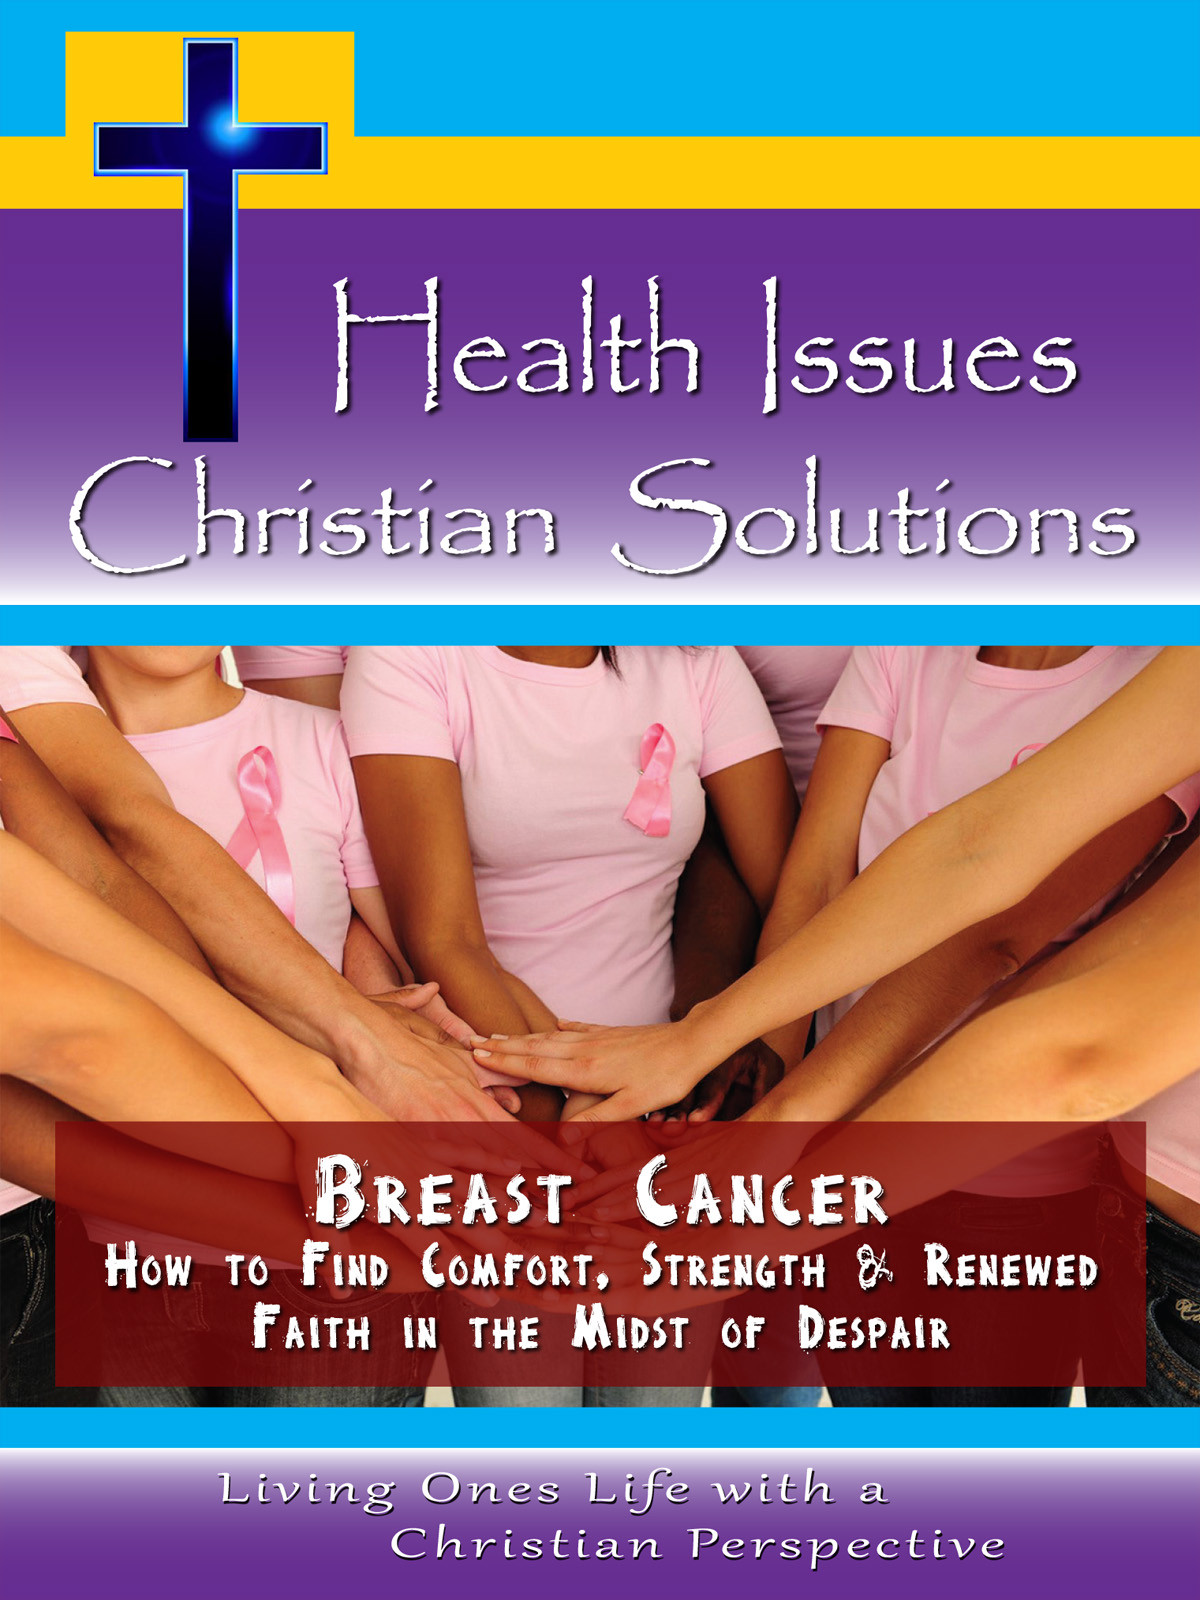 CH10028 - Breast Cancer How to Find Comfort, Strength & Renewed Faith in the Midst of Despair